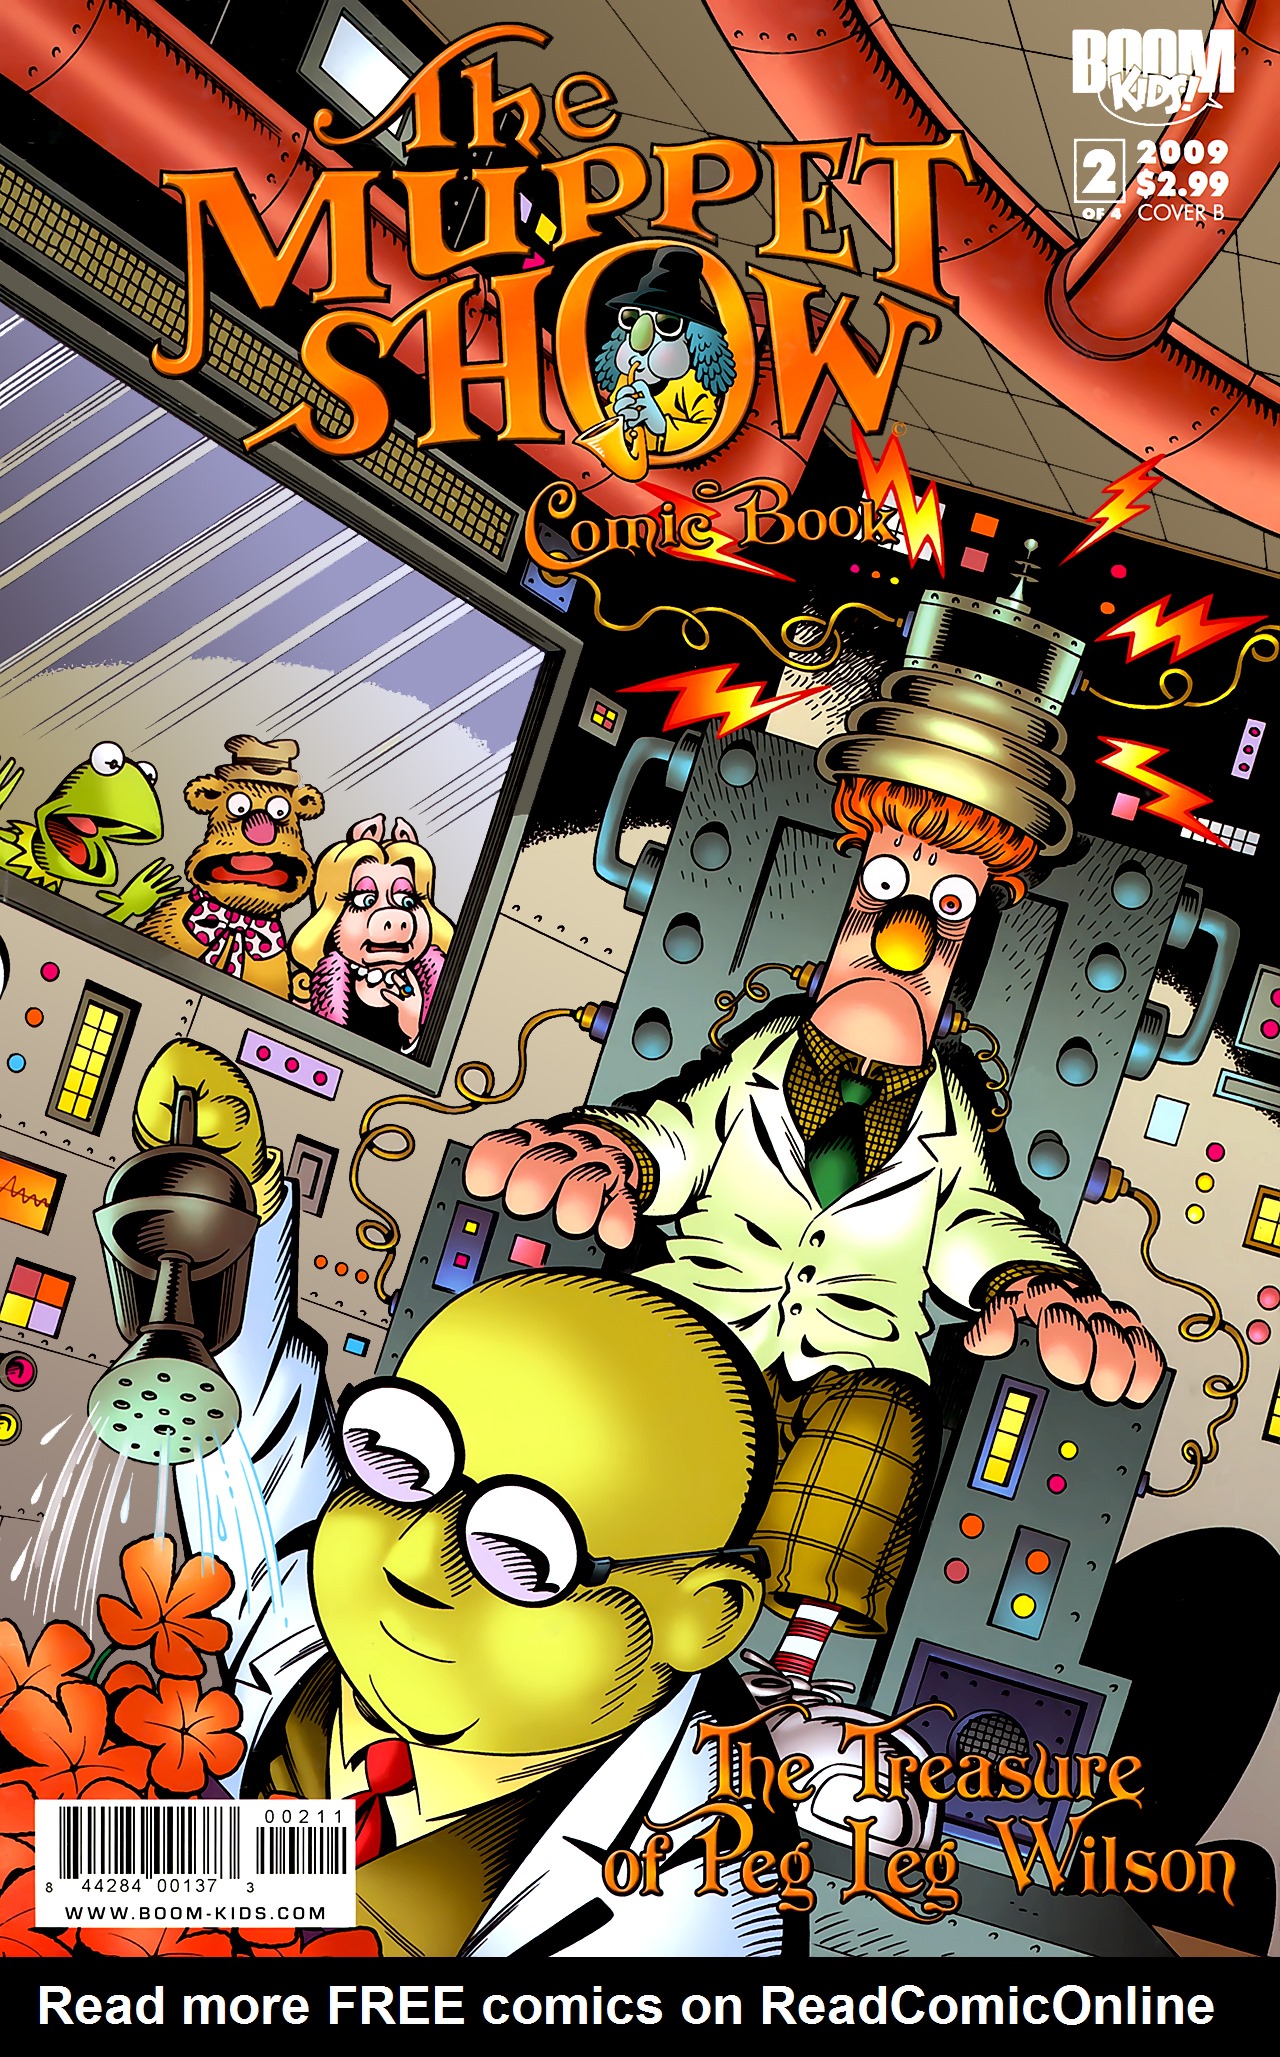 Read online The Muppet Show: The Treasure of Peg-Leg Wilson comic -  Issue #2 - 1